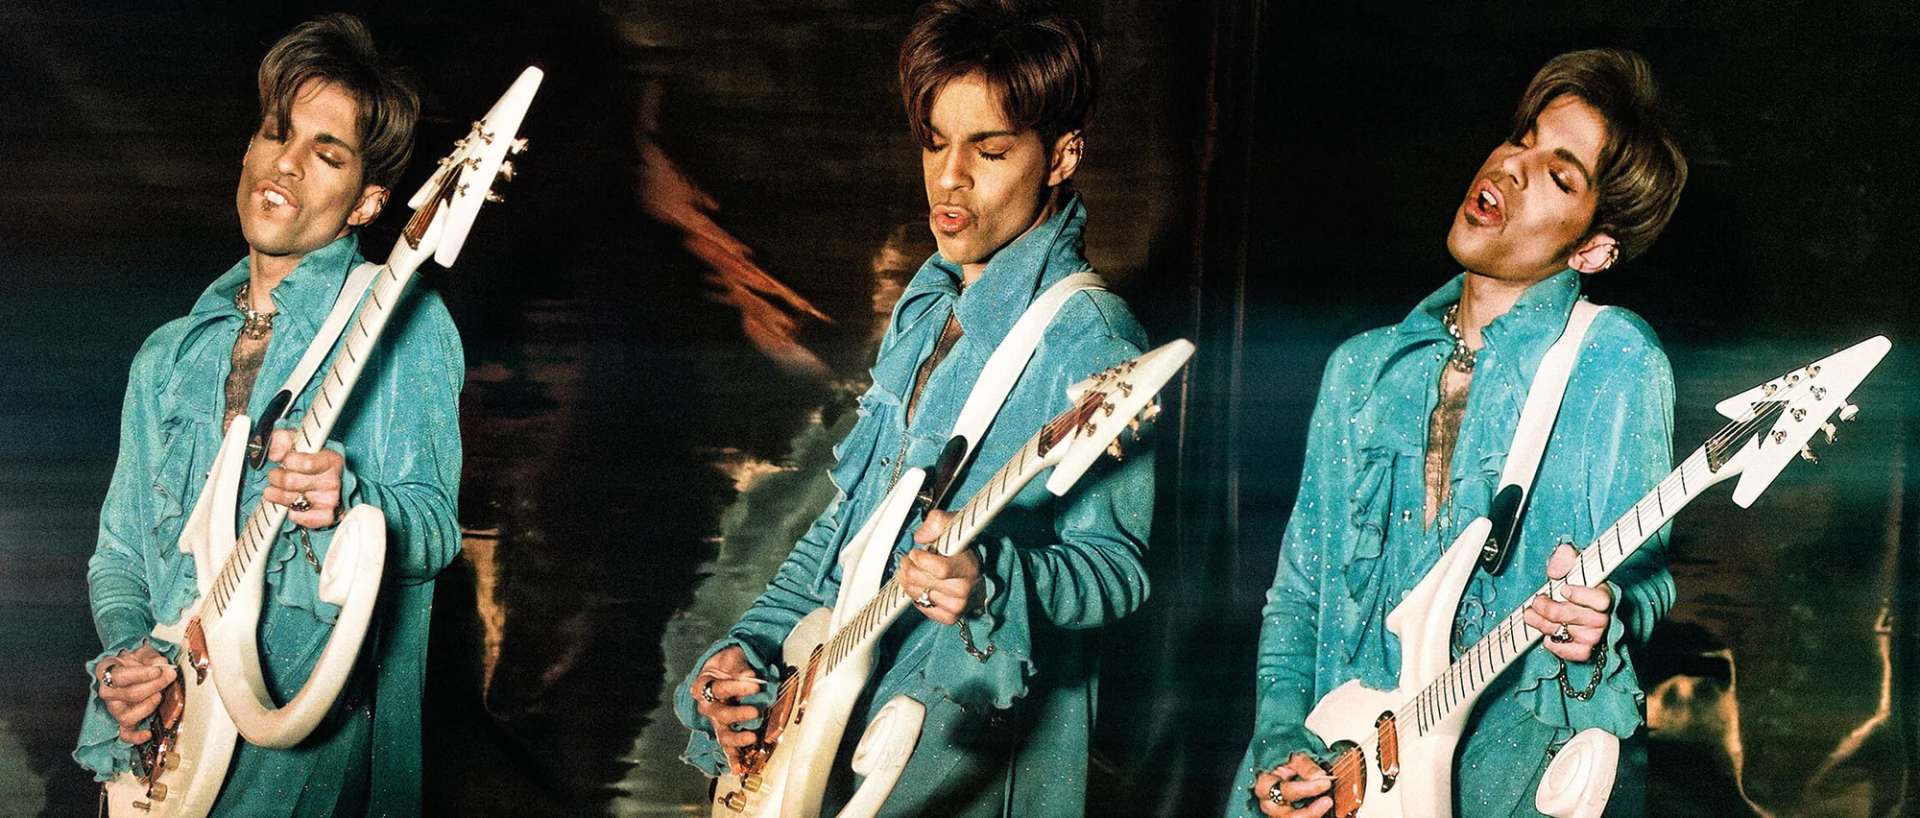 prince the immersive experience image archive prince guitar